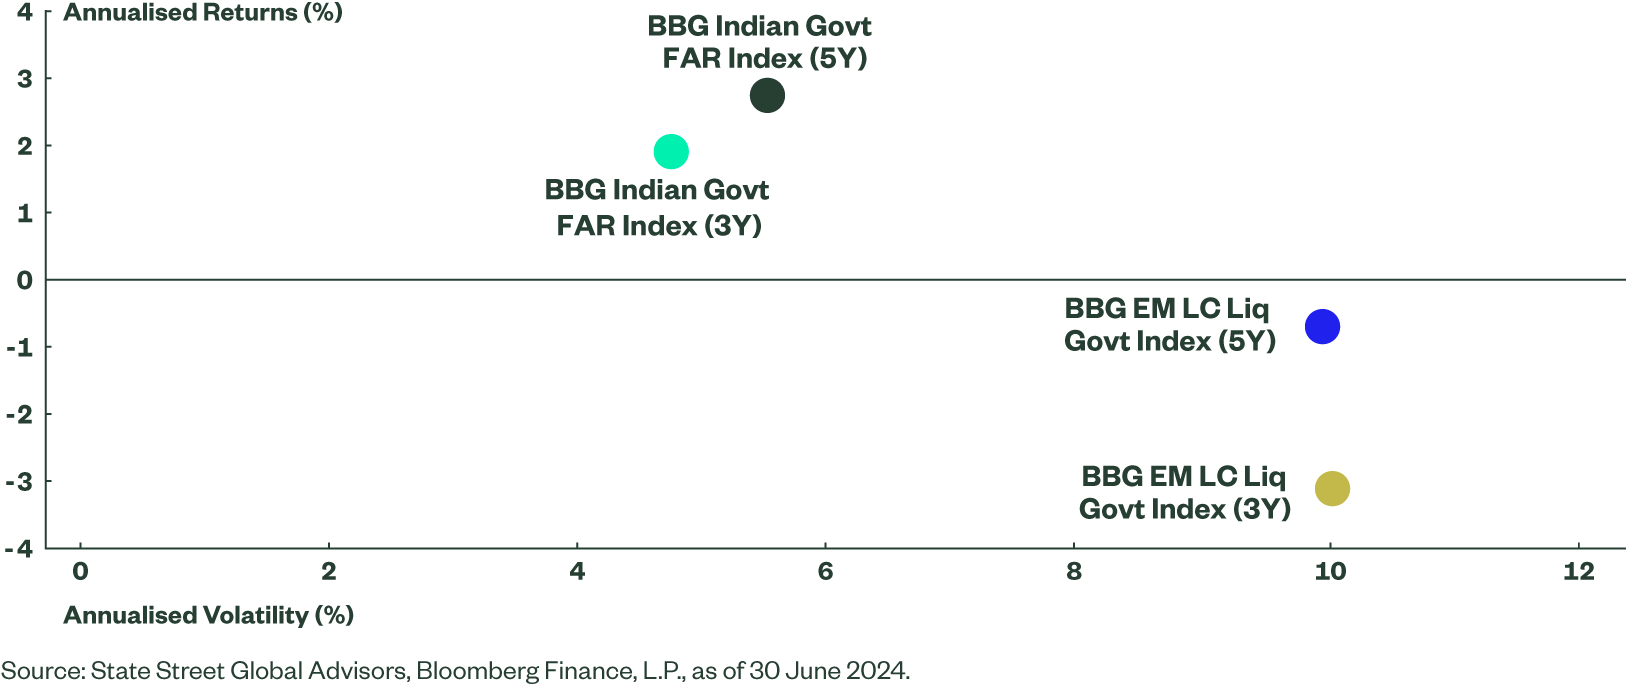 Figure 2: Higher Returns and Lower Volatility from the Indian Government FAR Bond Index than for the Broader EM Index